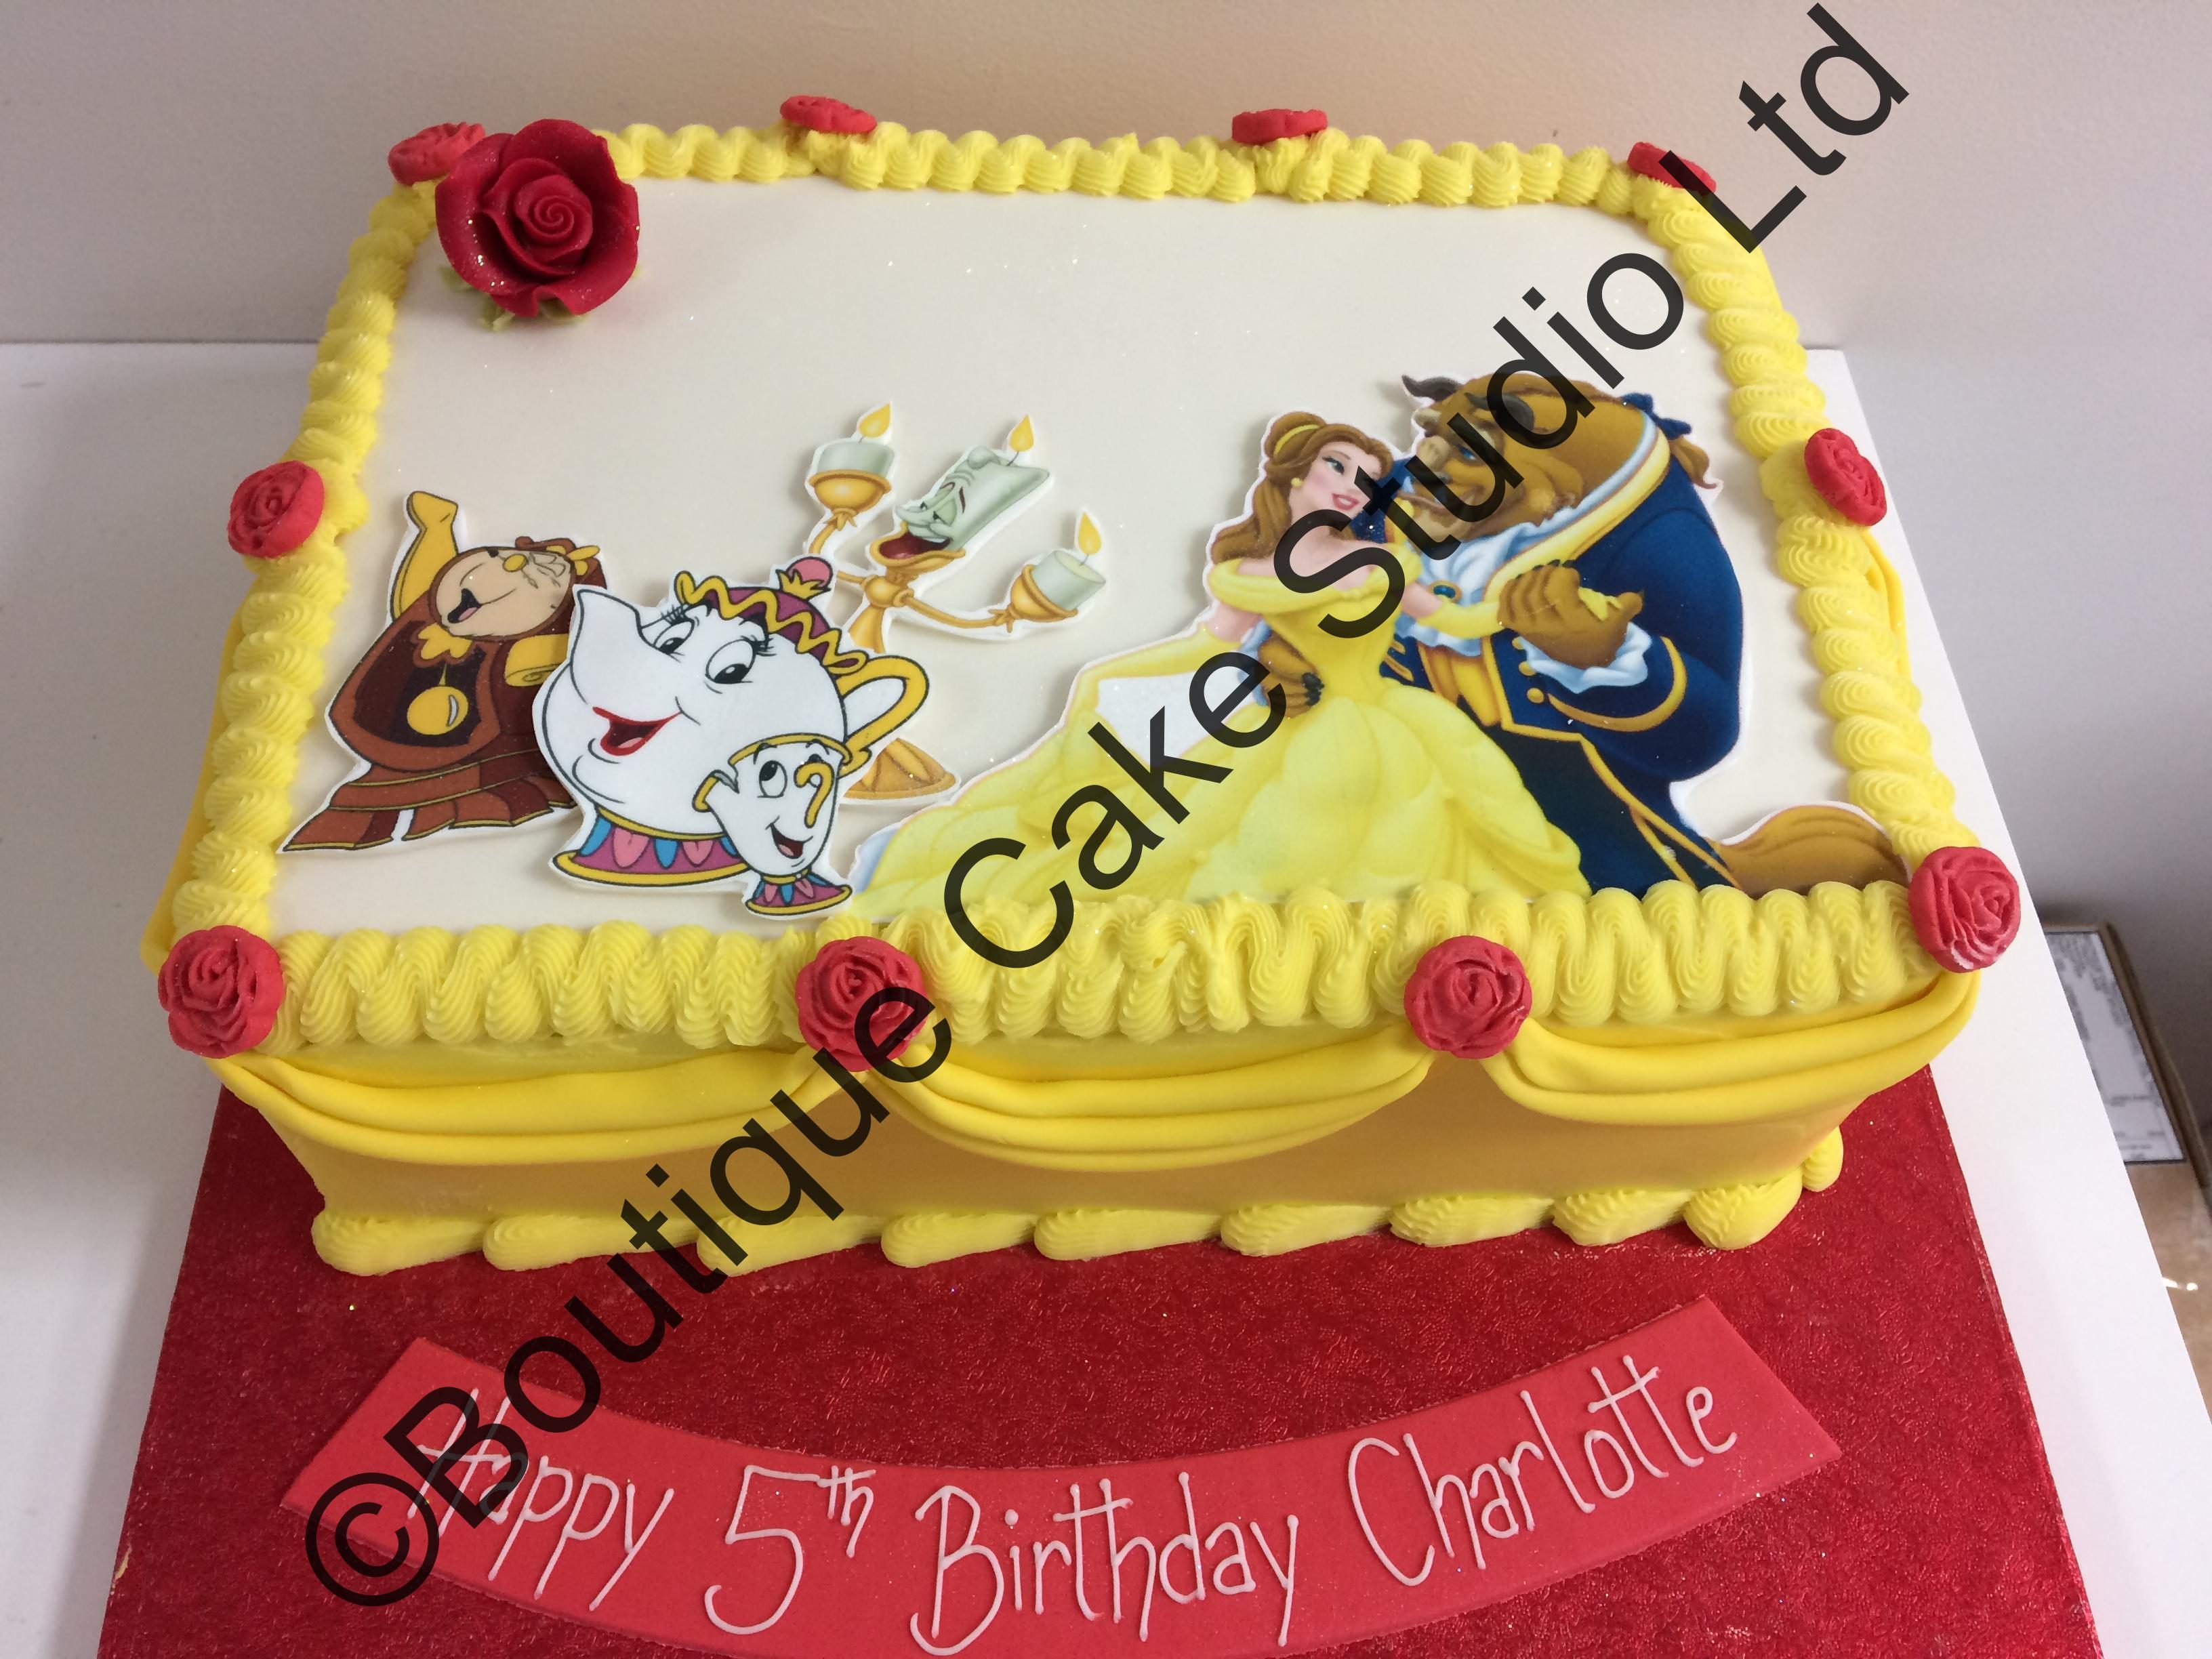 Buttercream Cake with Printed Pictures